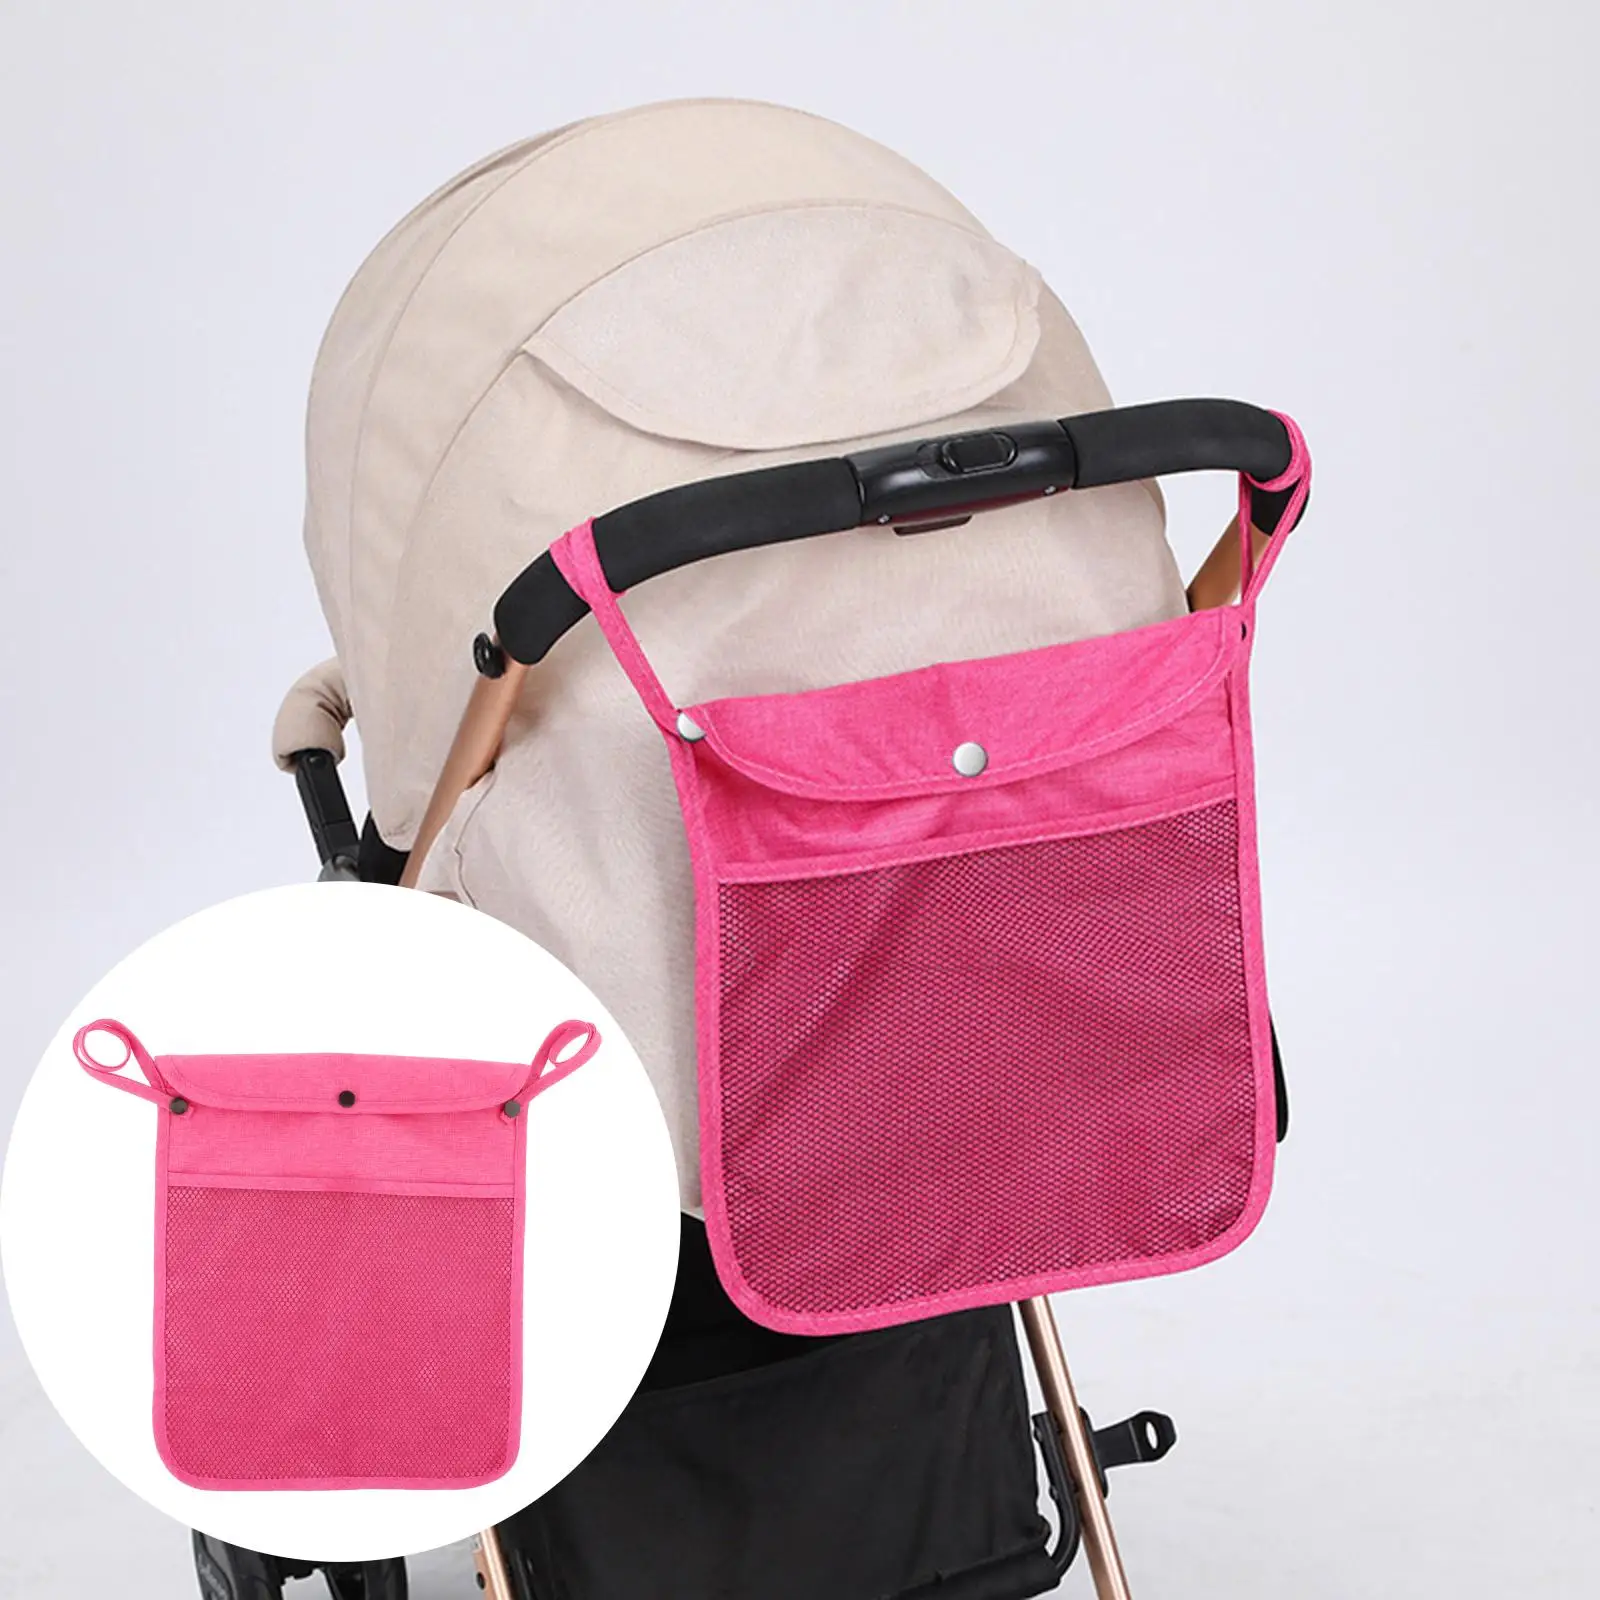 Baby Stroller Bag Large Capacity Diaper Bags Outdoor Travel Hanging Carriage Mommy Bag Infant Care Organizer